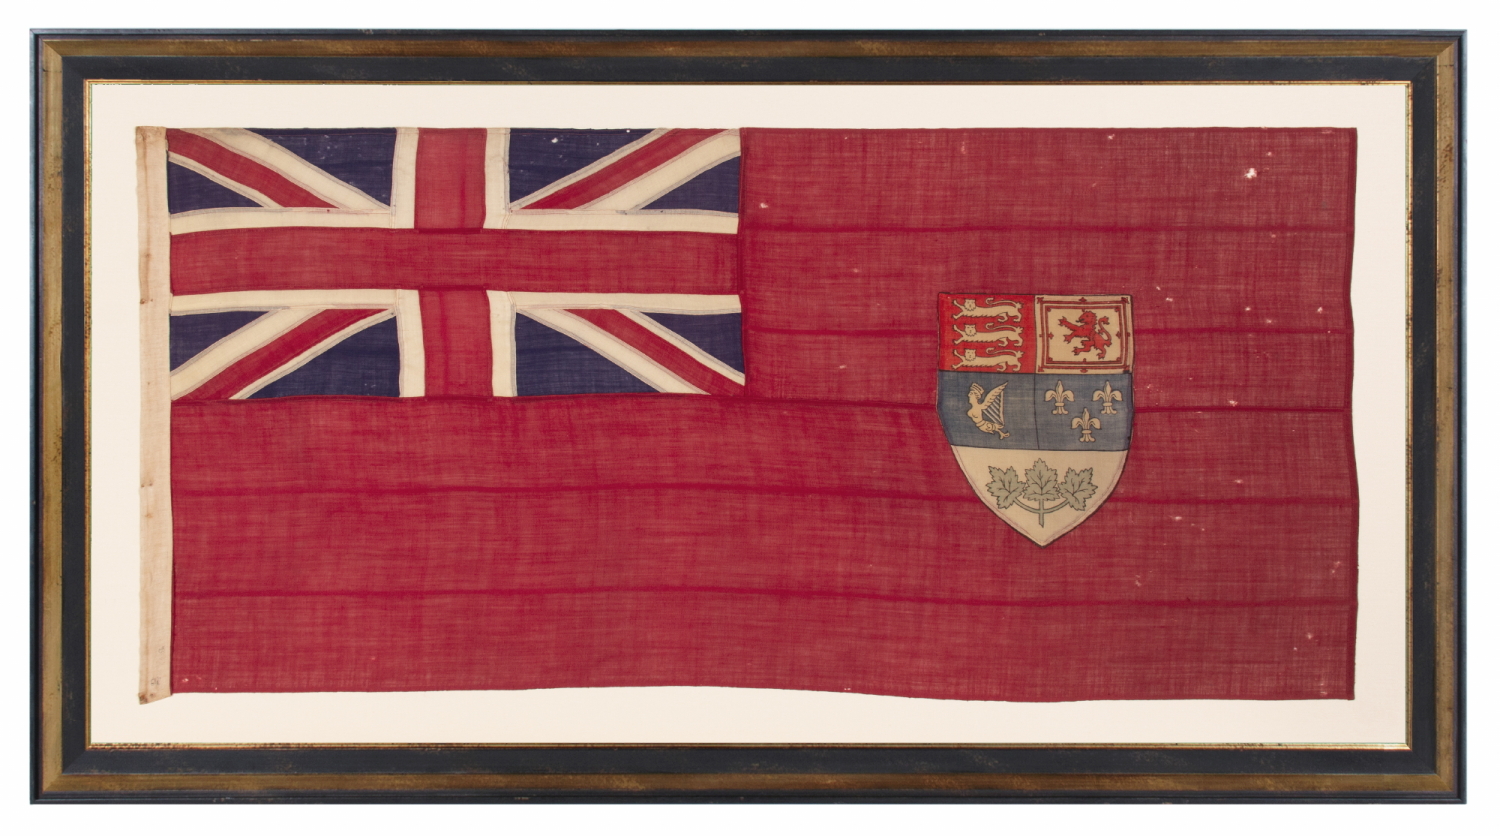 CANADIAN RED ENSIGN WITH THE ARMS OF CANADA, IN THE DESIGN ADOPTED IN 1922, IN USE UNTIL APPROXIMATELY 1957; THIS EXAMPLE LIKELY MADE circa 1920’s – 1940’s